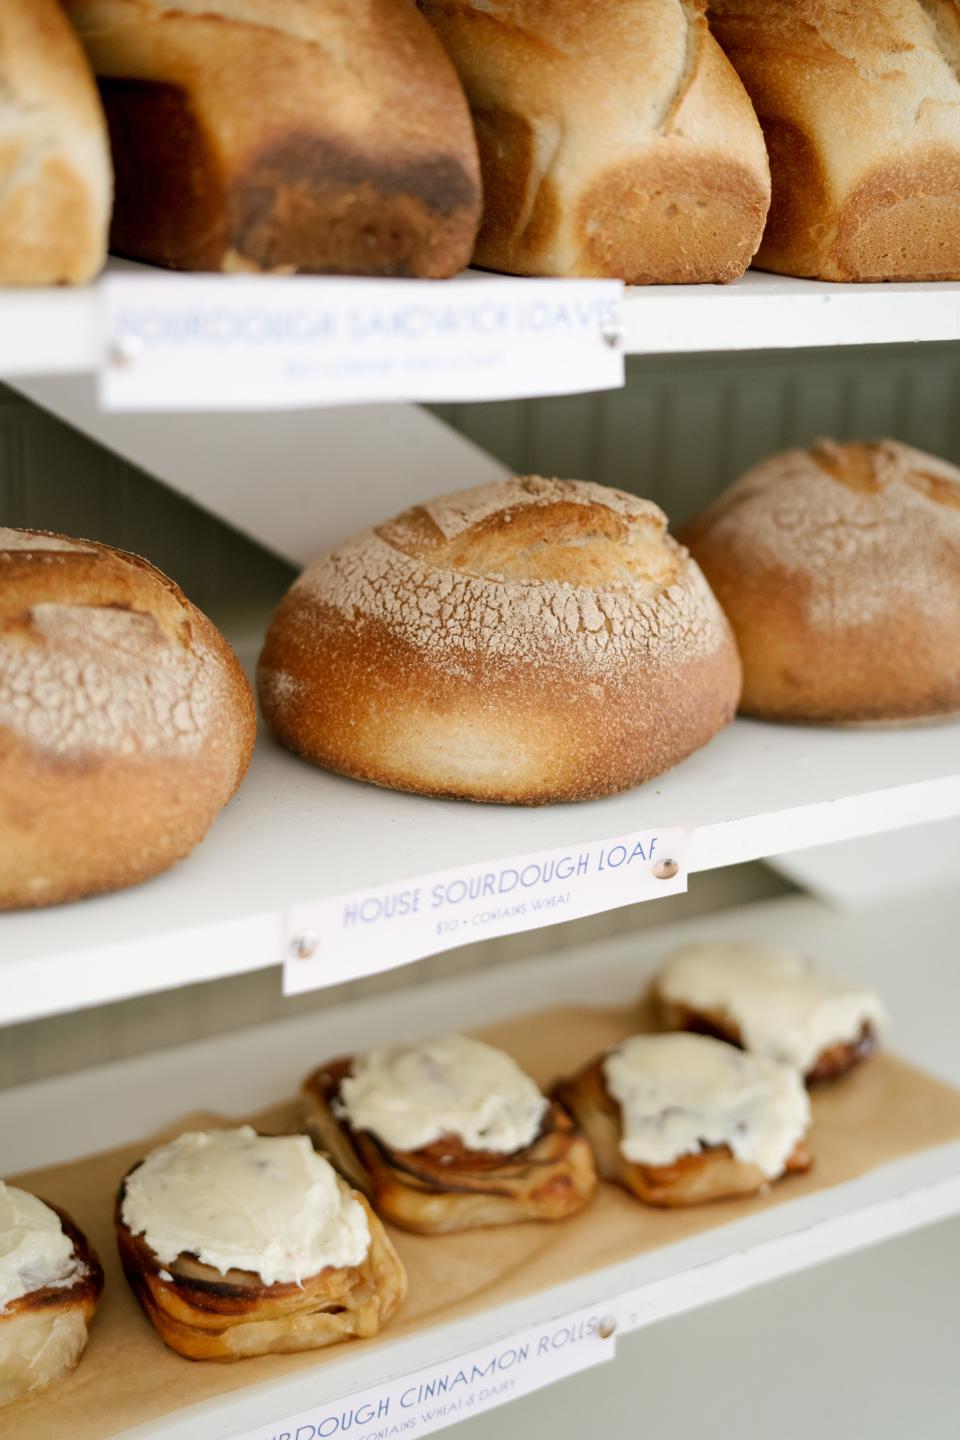 Spread Market & Larder is a small neighborhood bakery and market in the Germantown neighborhood of Nashville, Tenn. Owned by a husband and wife duo, the market is known for its specialty pantry items, fresh sourdough bread and sourdough cinnamon rolls.